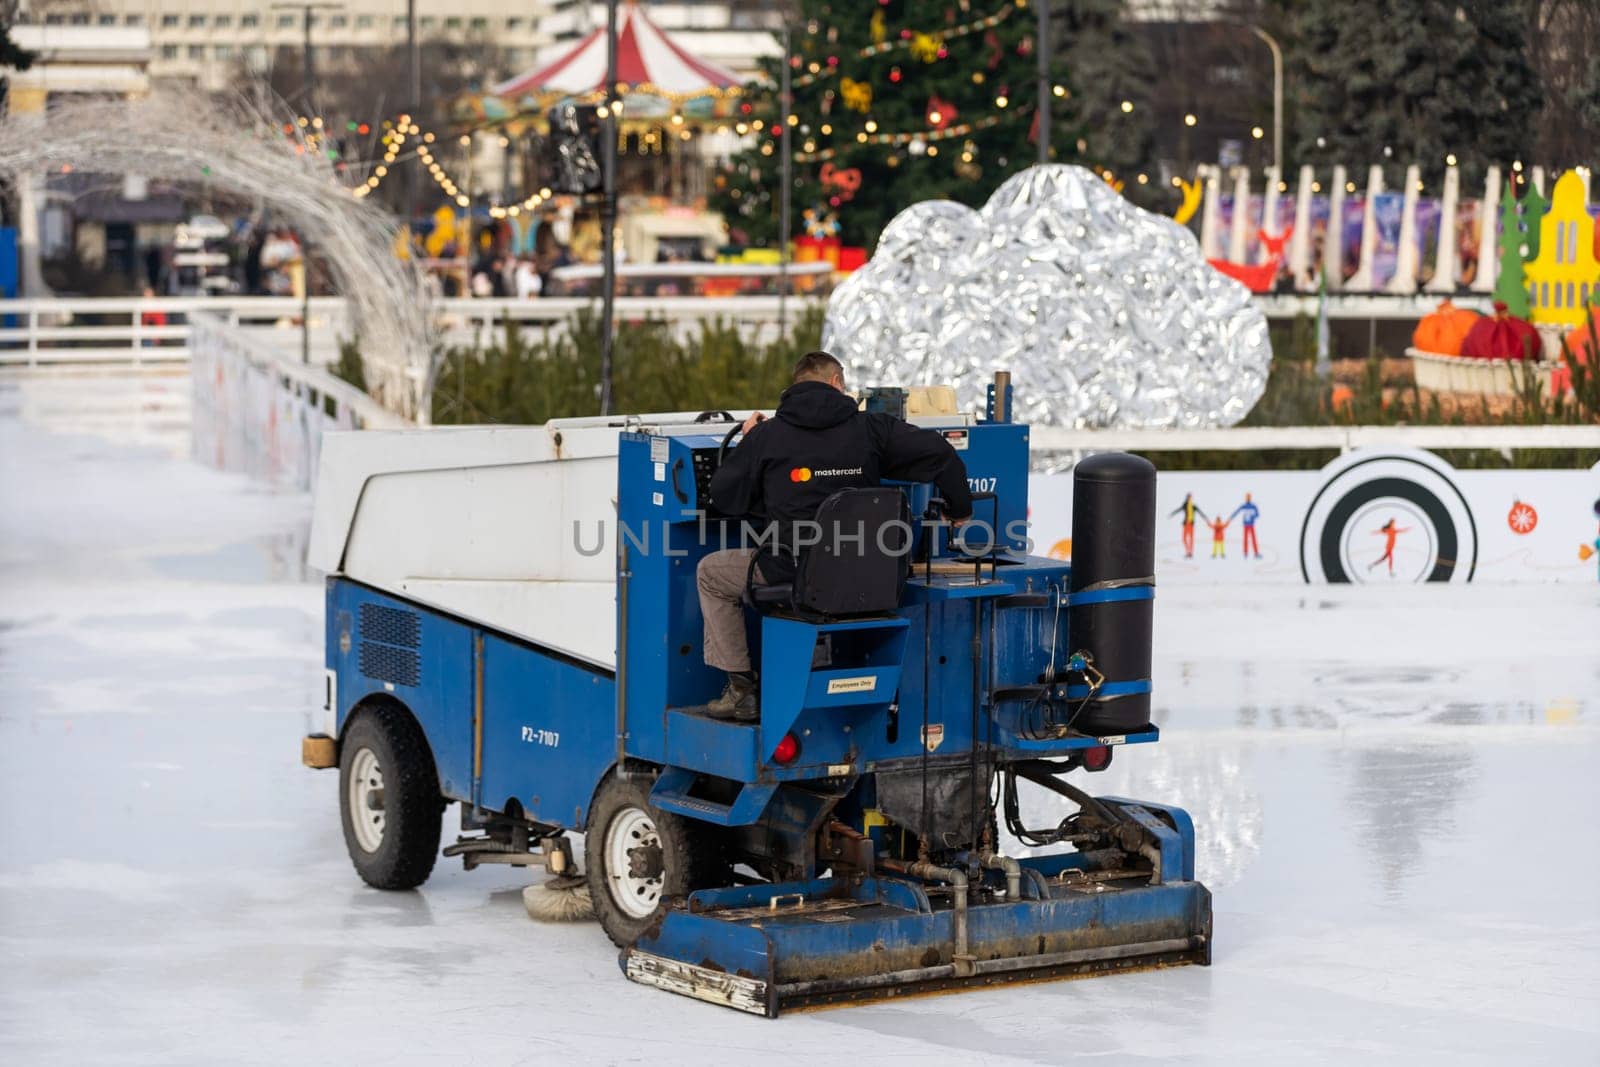 special machine ice harvester cleans the ice rink. transport industry by Andelov13